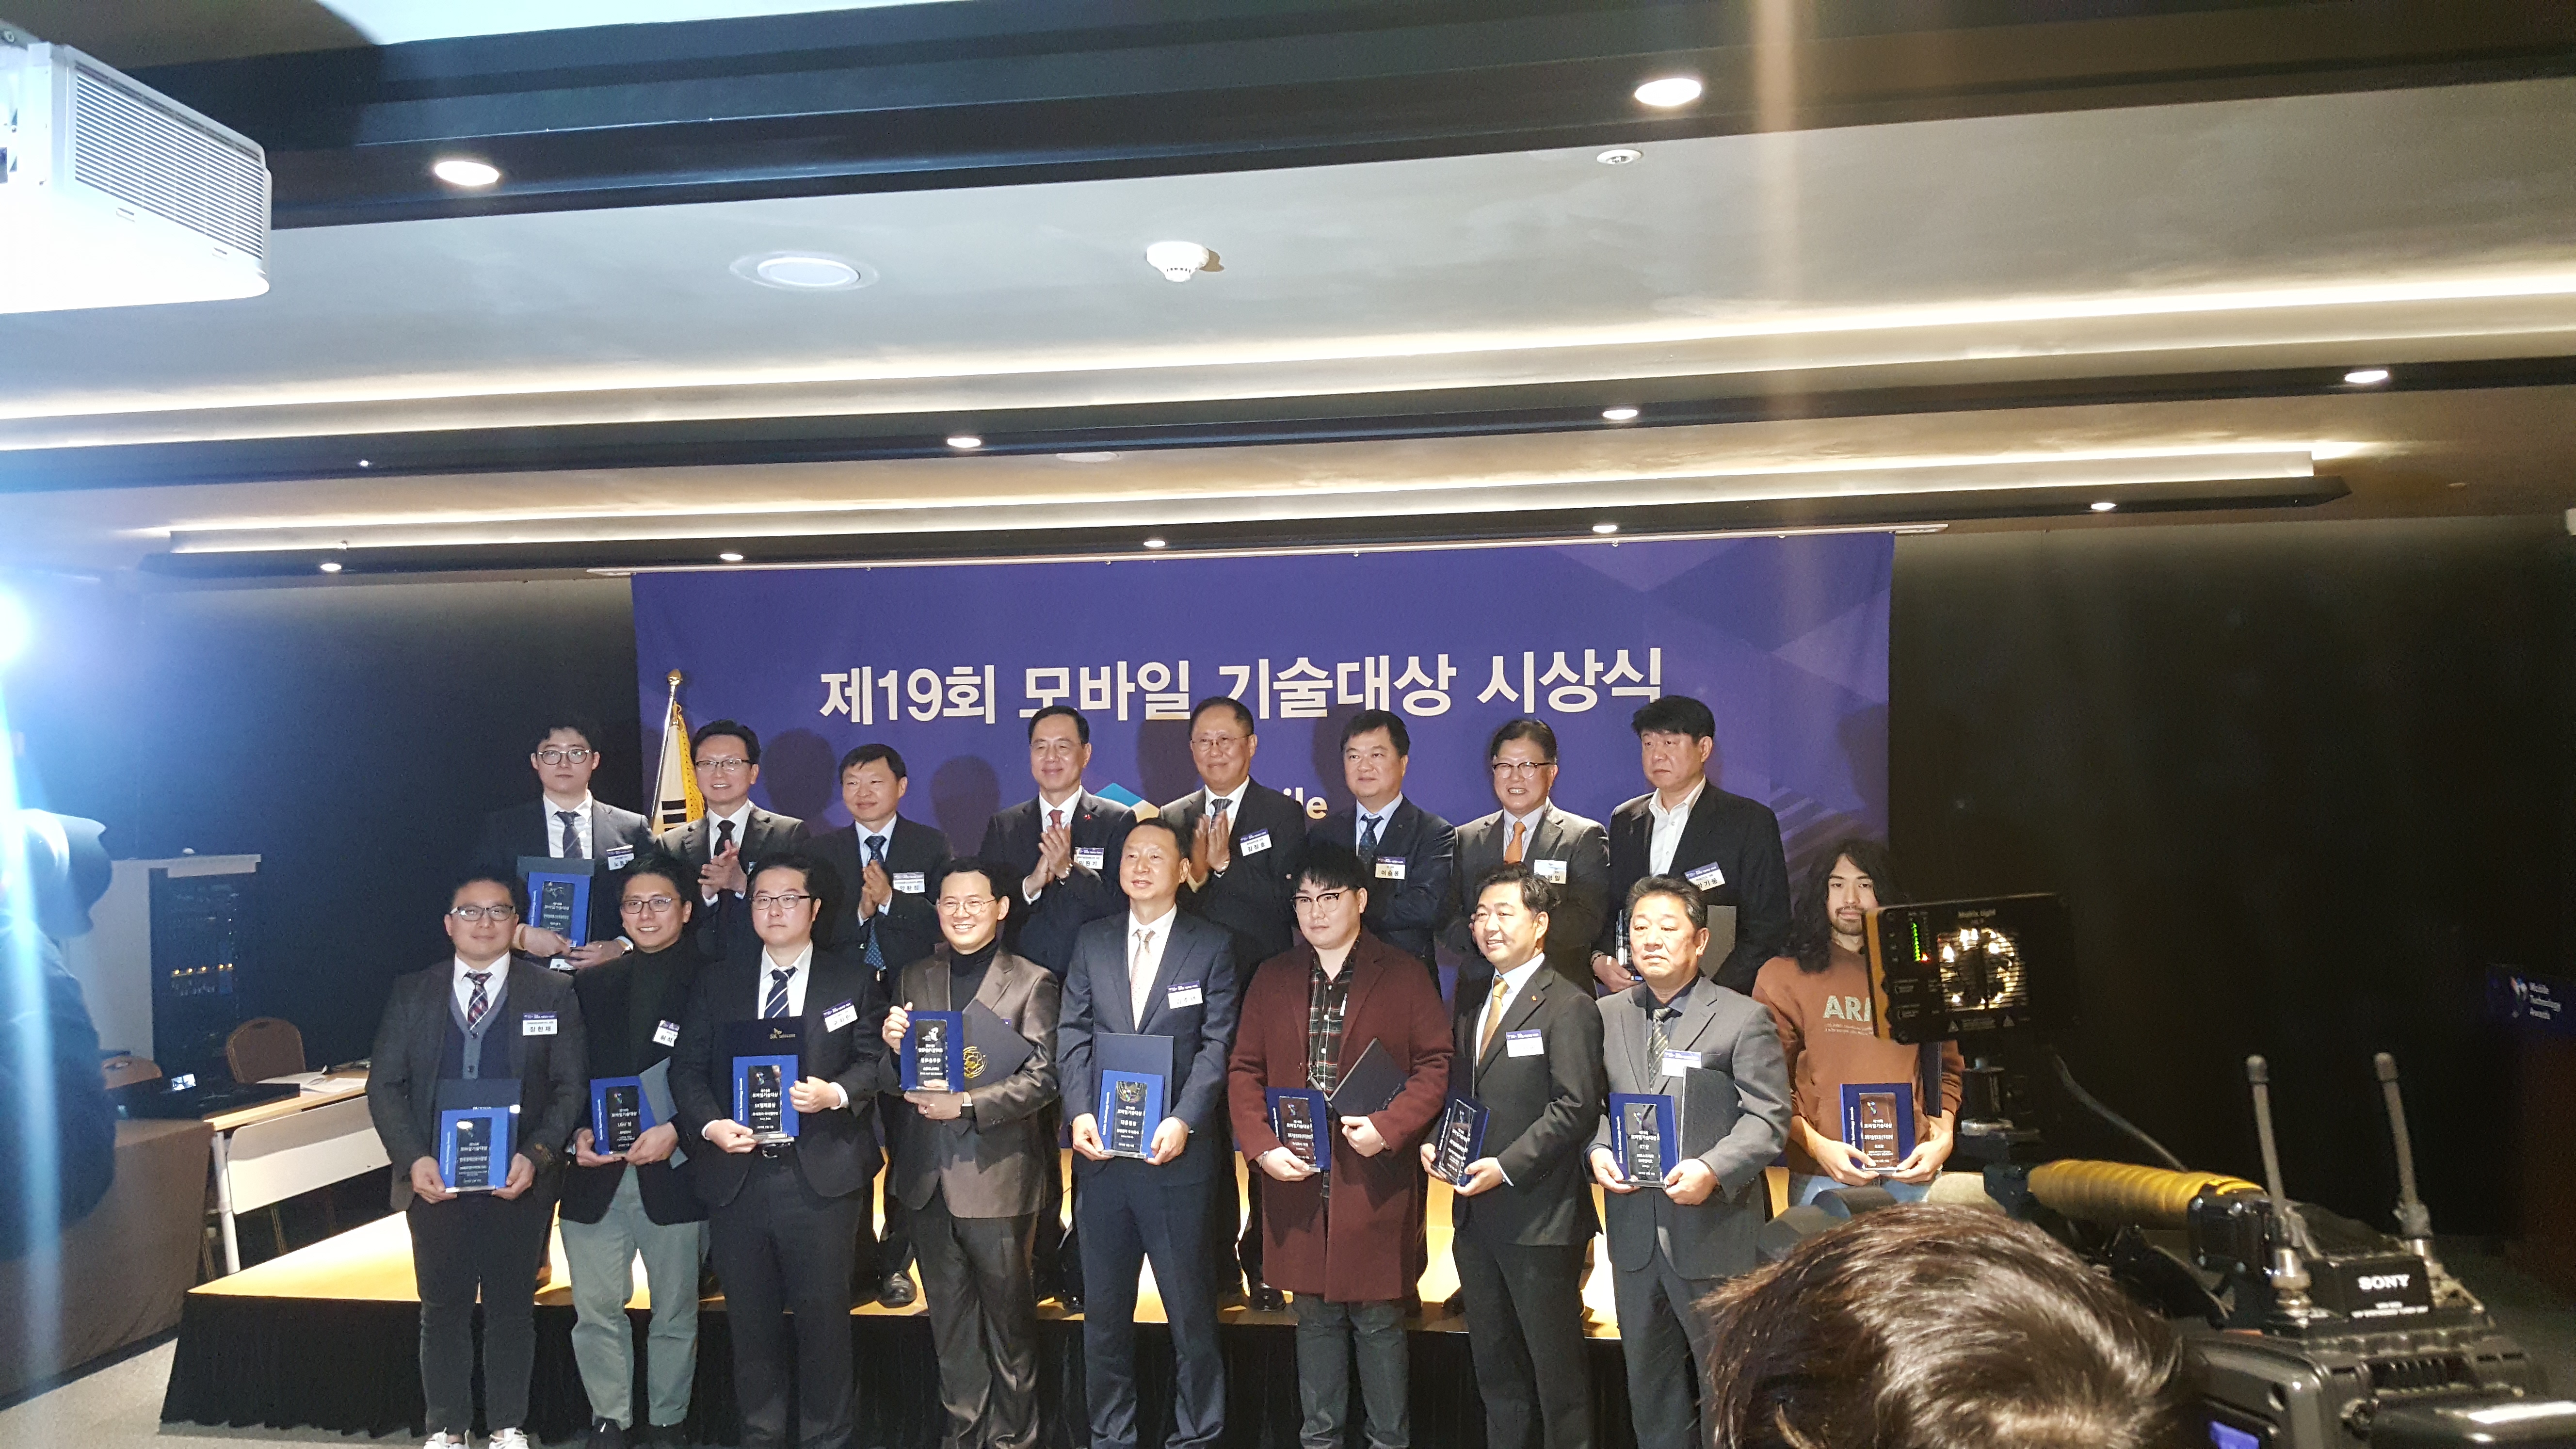 KT CEO Award at 19th Mobile Technology Awards